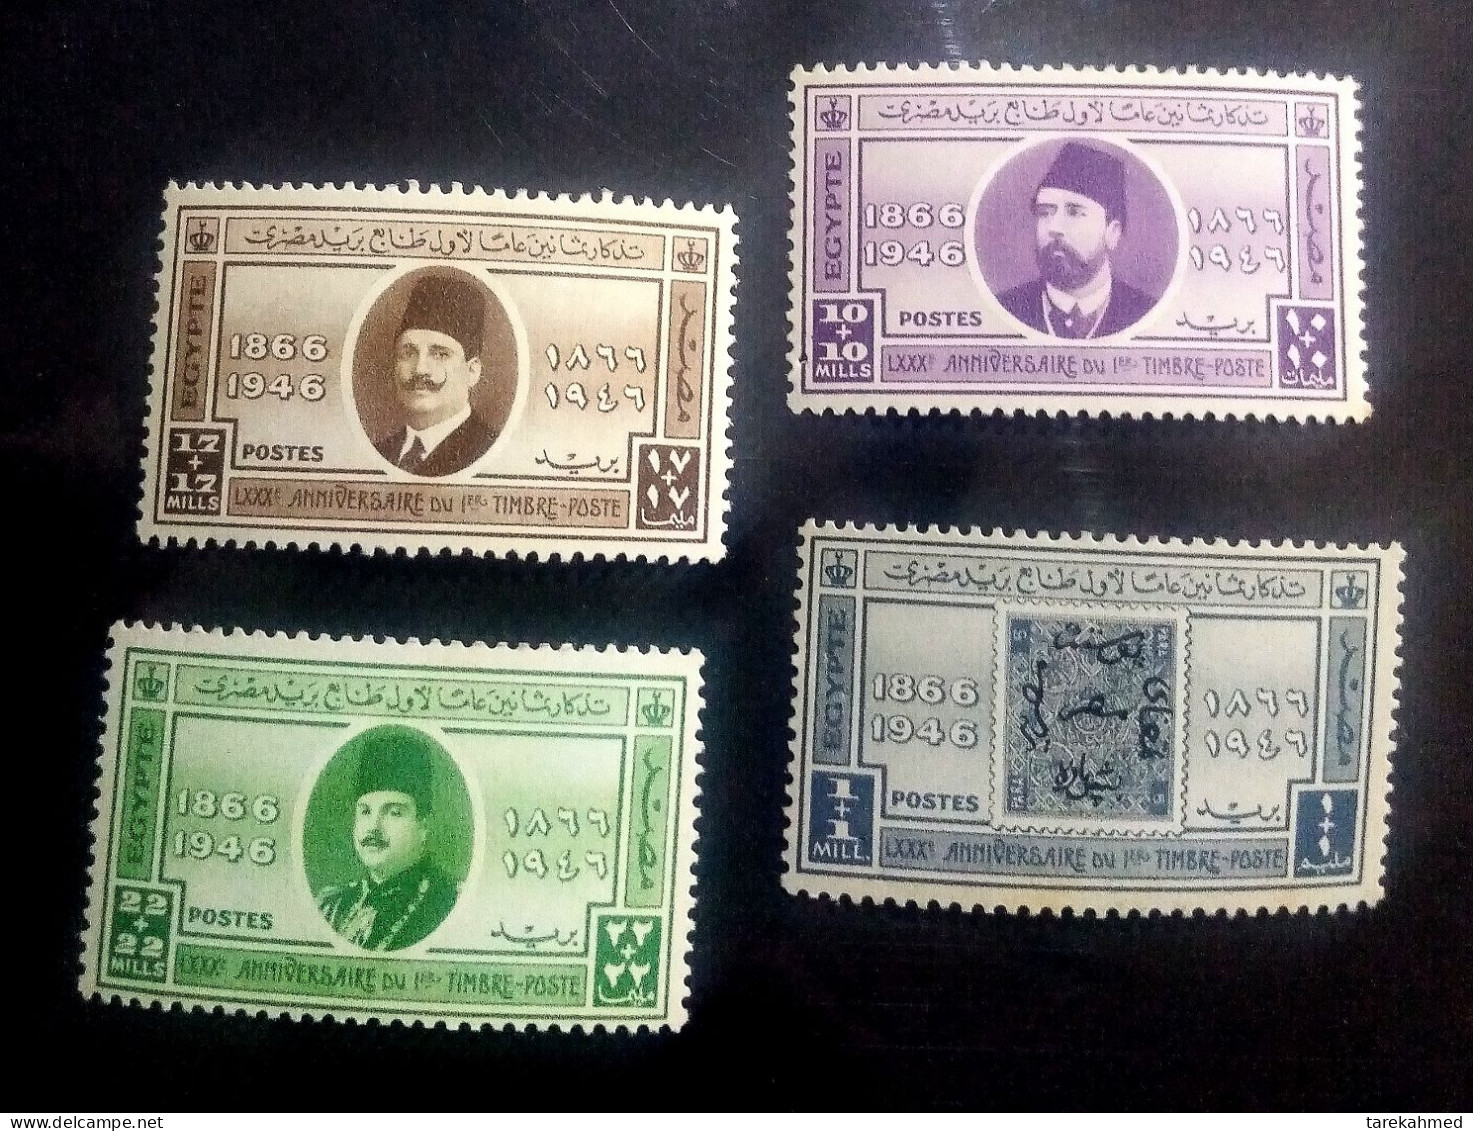 Egypt 1946 - Complete Set Of The 80th Anniv. Of Egypt’s 1st Postage Stamp - MNH, Original Gum. - Neufs